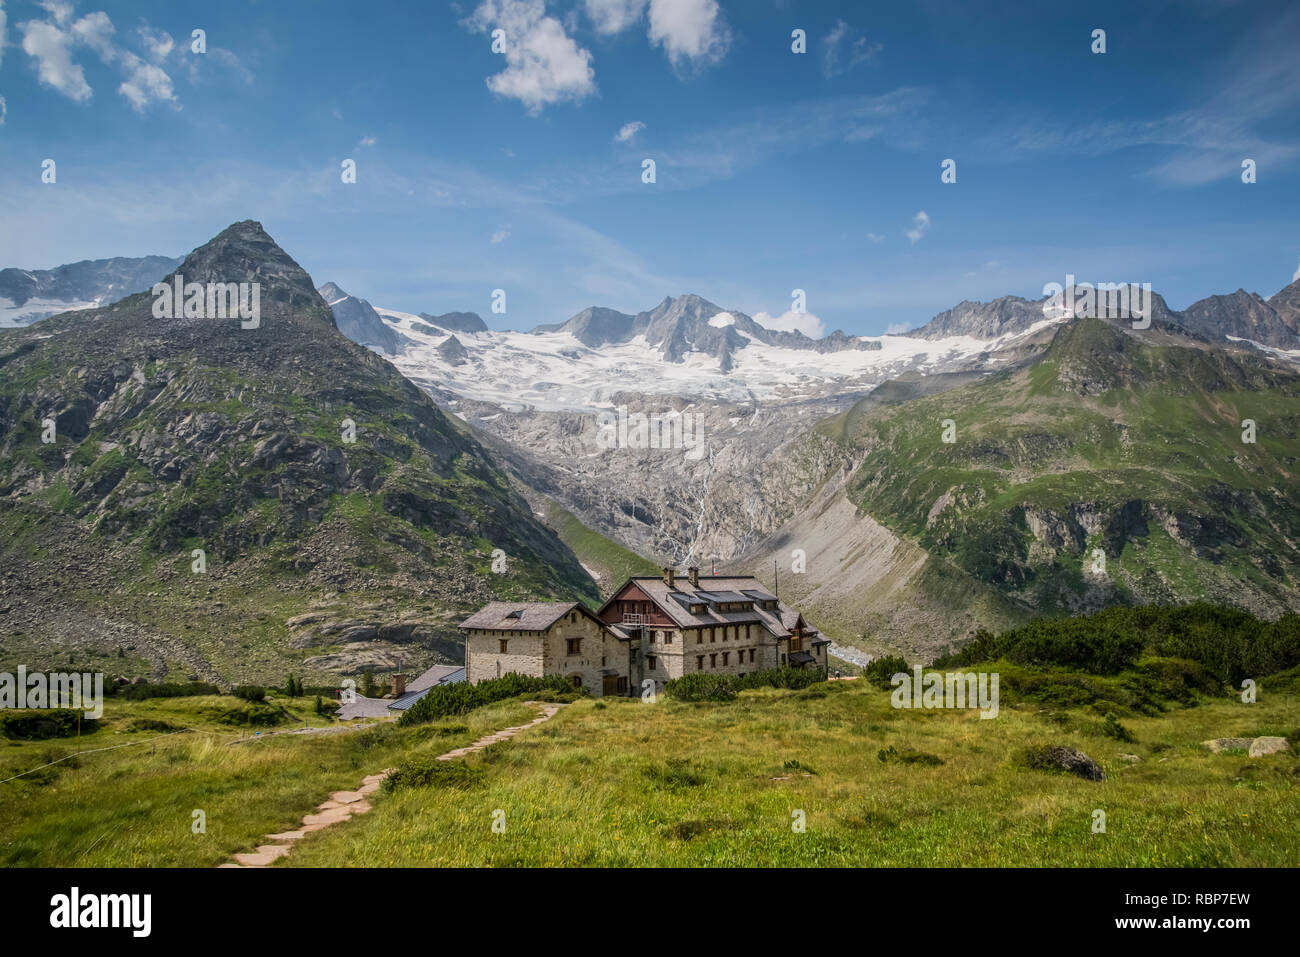 Berliner Hut mountain refuge in the Zillertal Alps of the Tyrol near the resort town of Mayrhofen in Austria Stock Photo